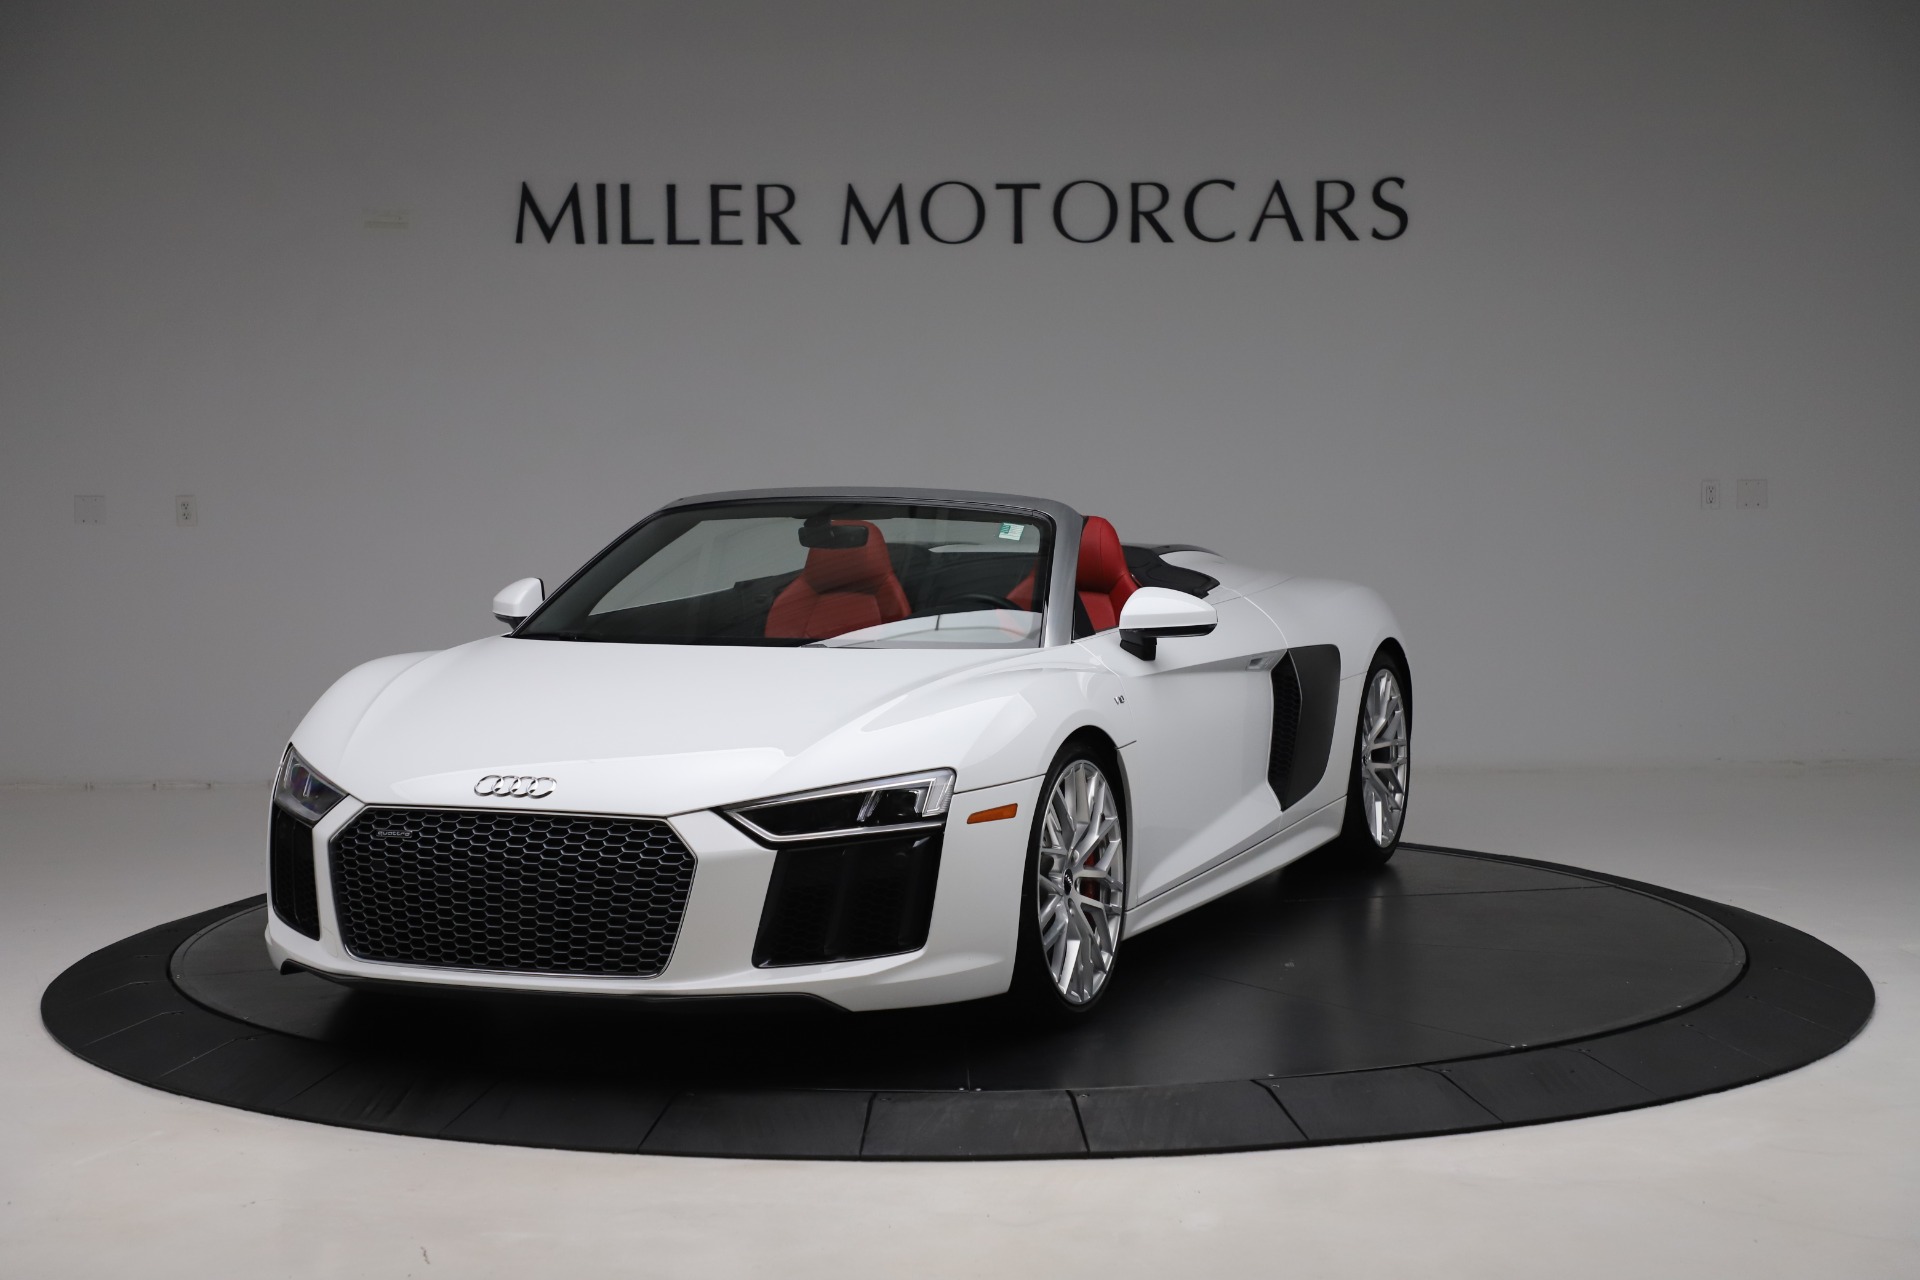 Used 2017 Audi R8 5.2 quattro V10 Spyder for sale Sold at Rolls-Royce Motor Cars Greenwich in Greenwich CT 06830 1